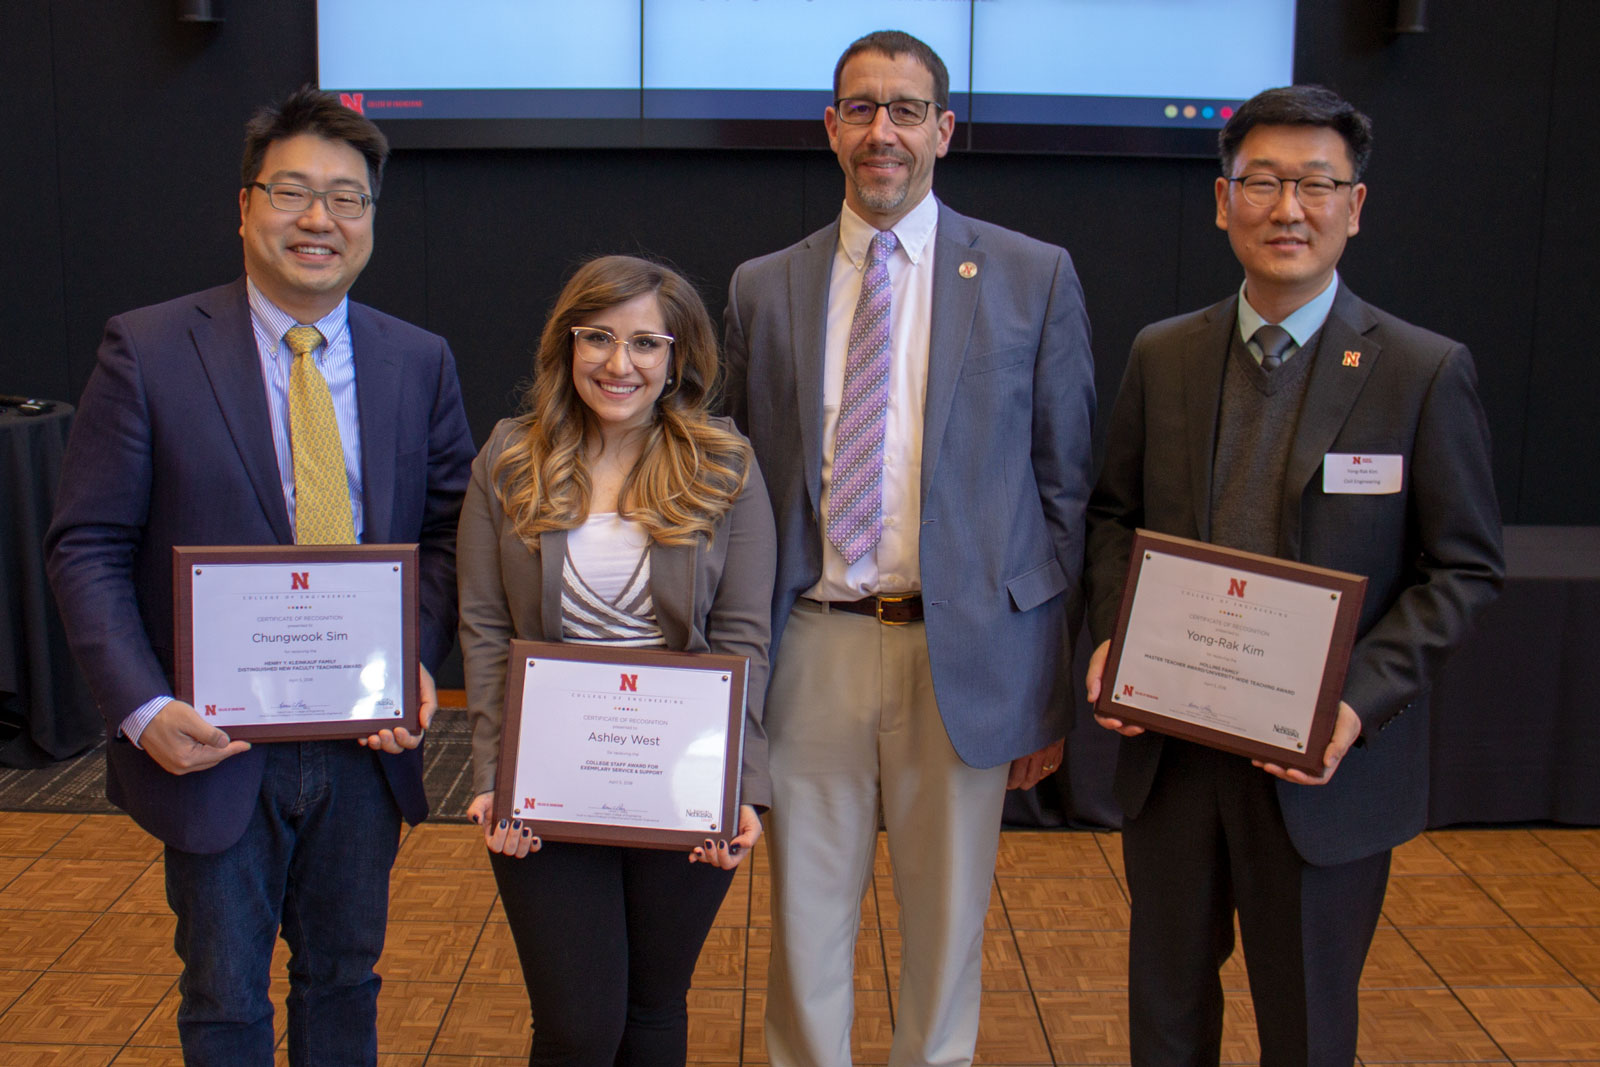 Left to right: Dr. Chungwook Sim, Ashley West, Dr. Daniel Linzell and Dr. Yong-Rak Kim. Not pictured: Dr. Libby Jones and Dr. John Stansbury